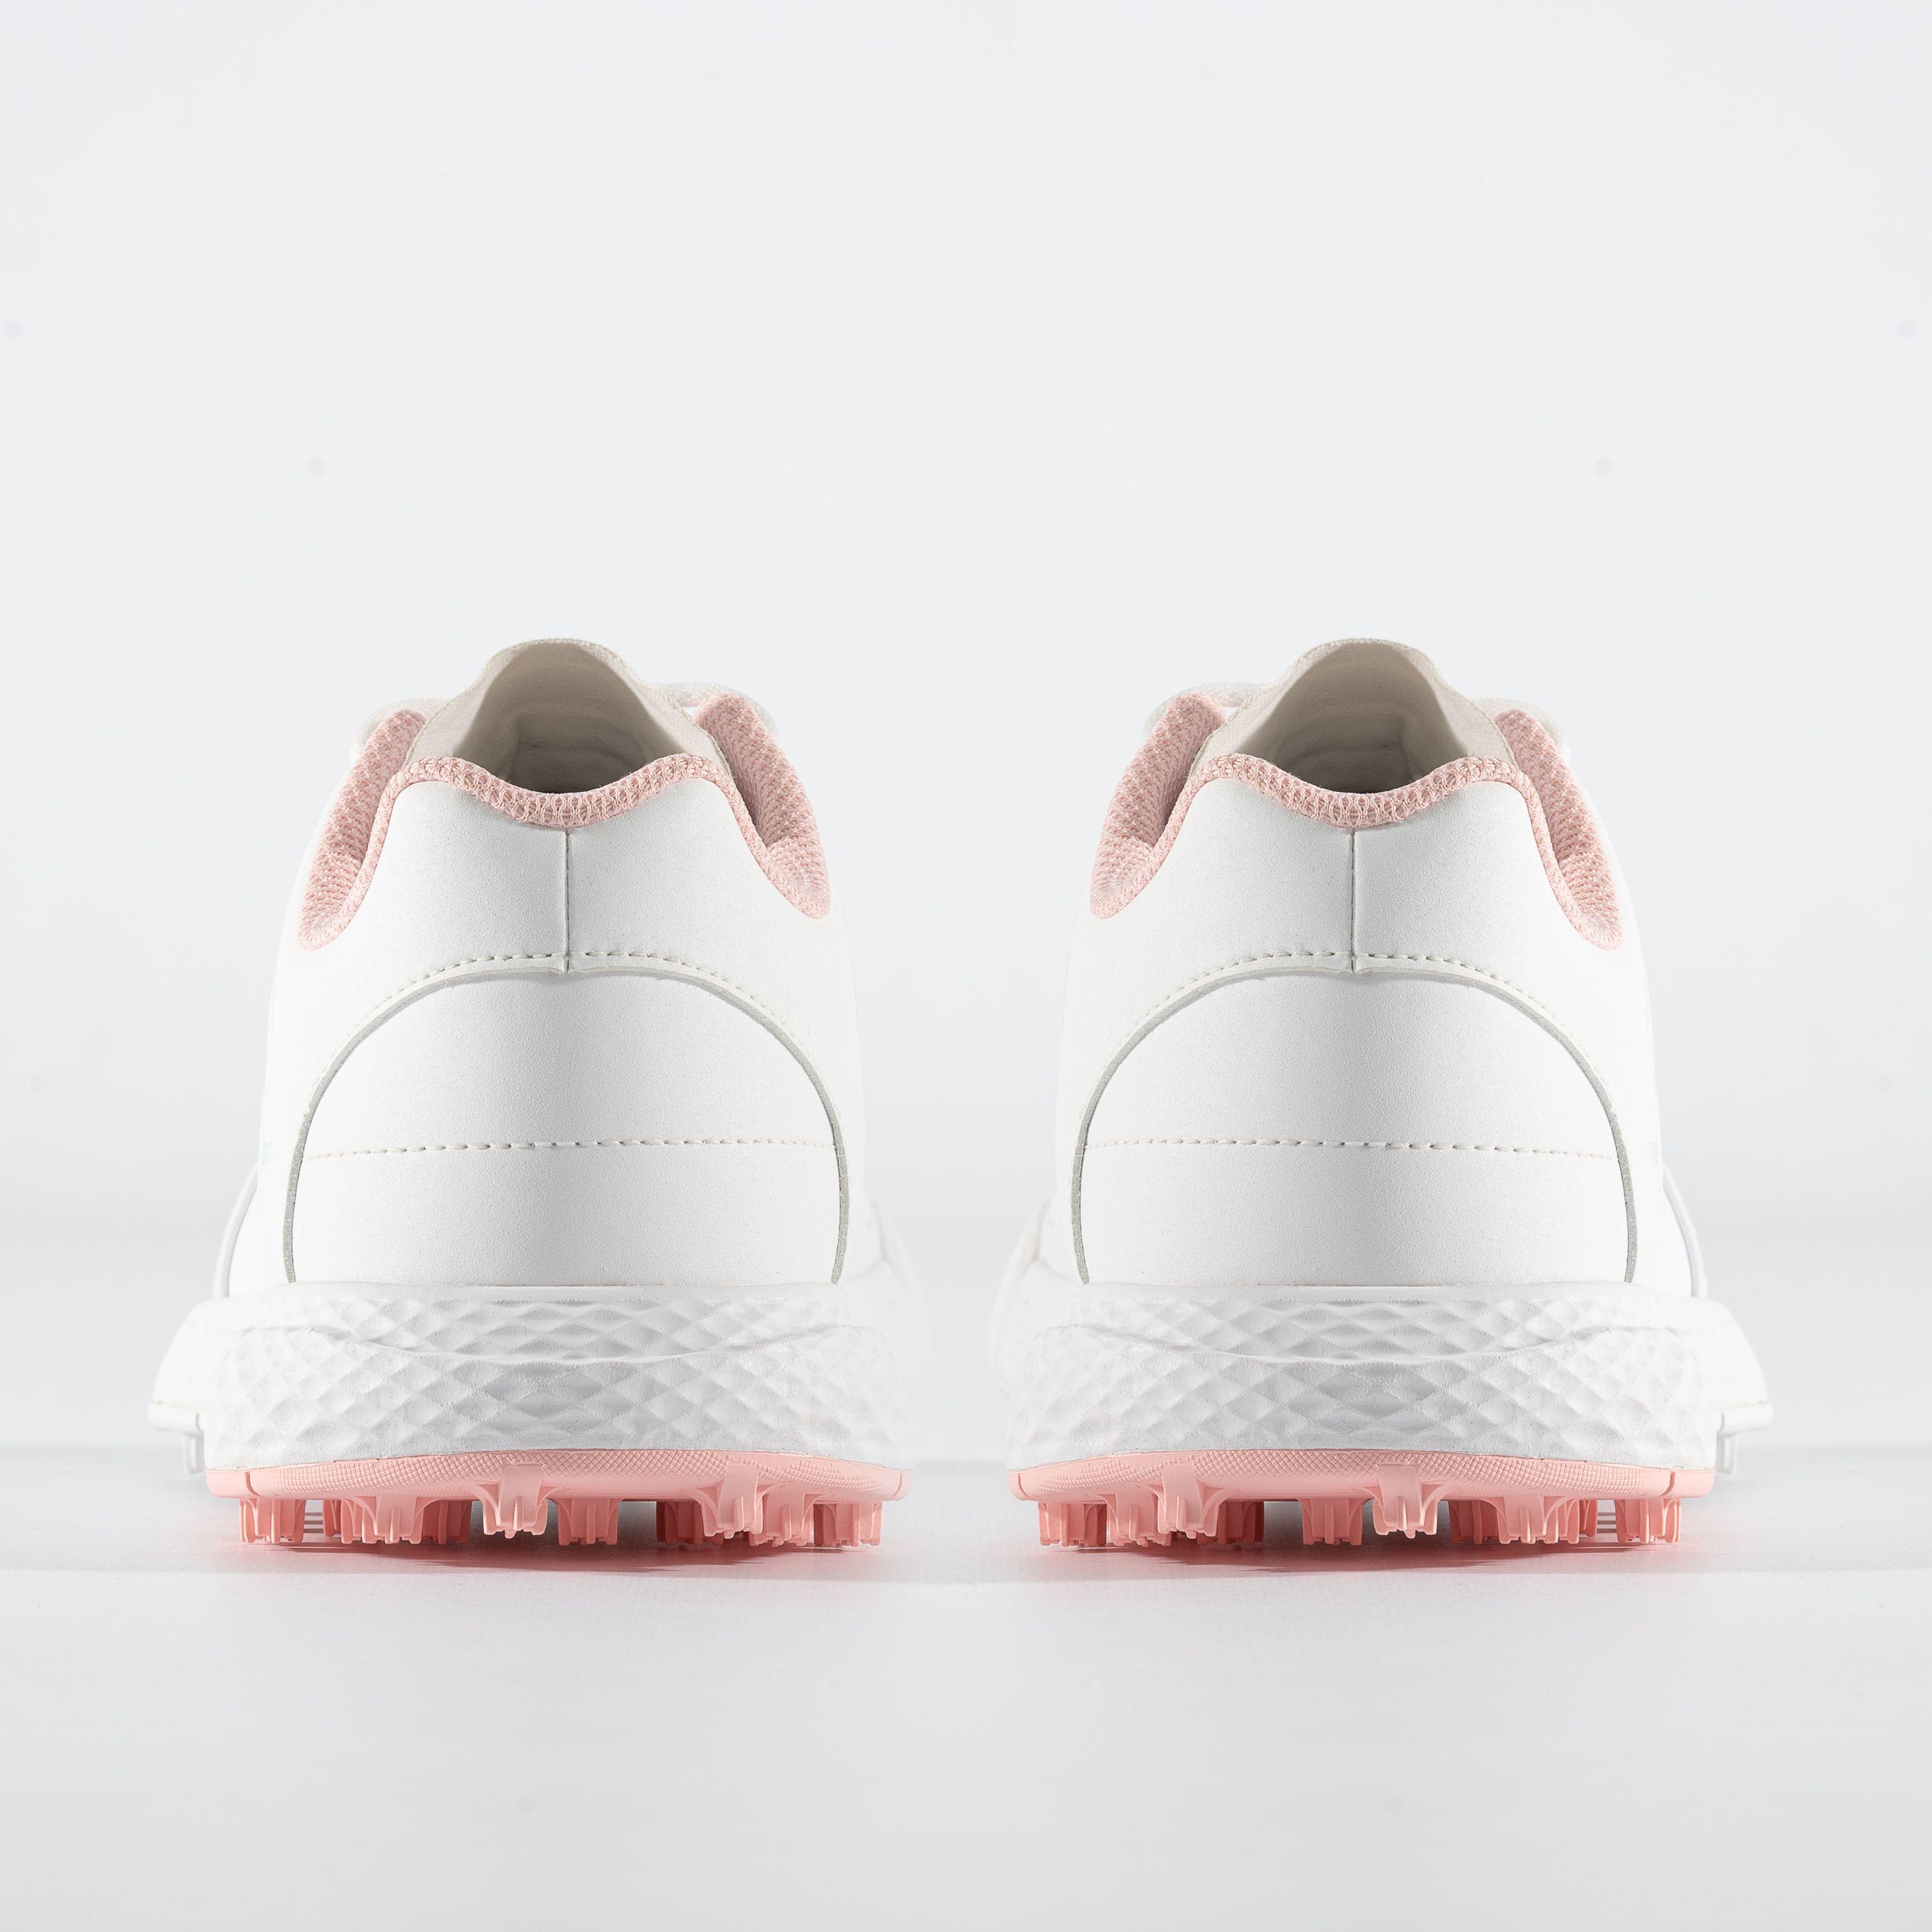 GIRL'S GOLF SHOES WATERPROOF GRIP - WHITE AND PINK 5/7